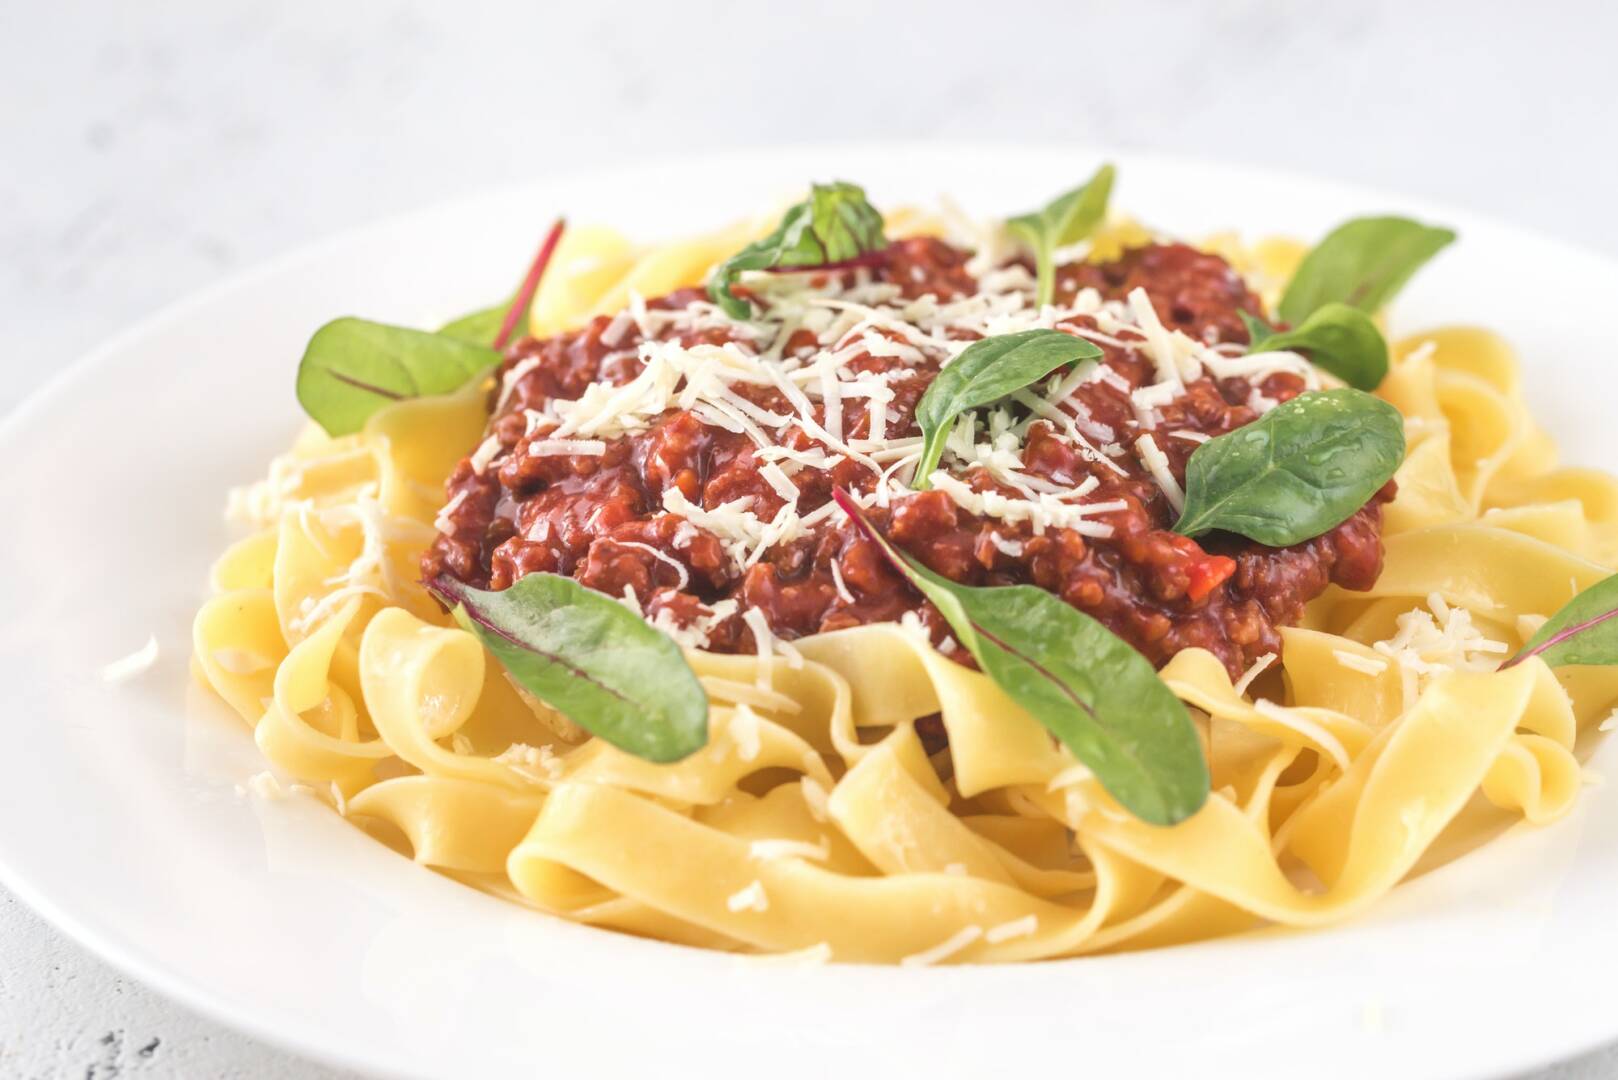 Portion of tagliatelle with bolognese sauce